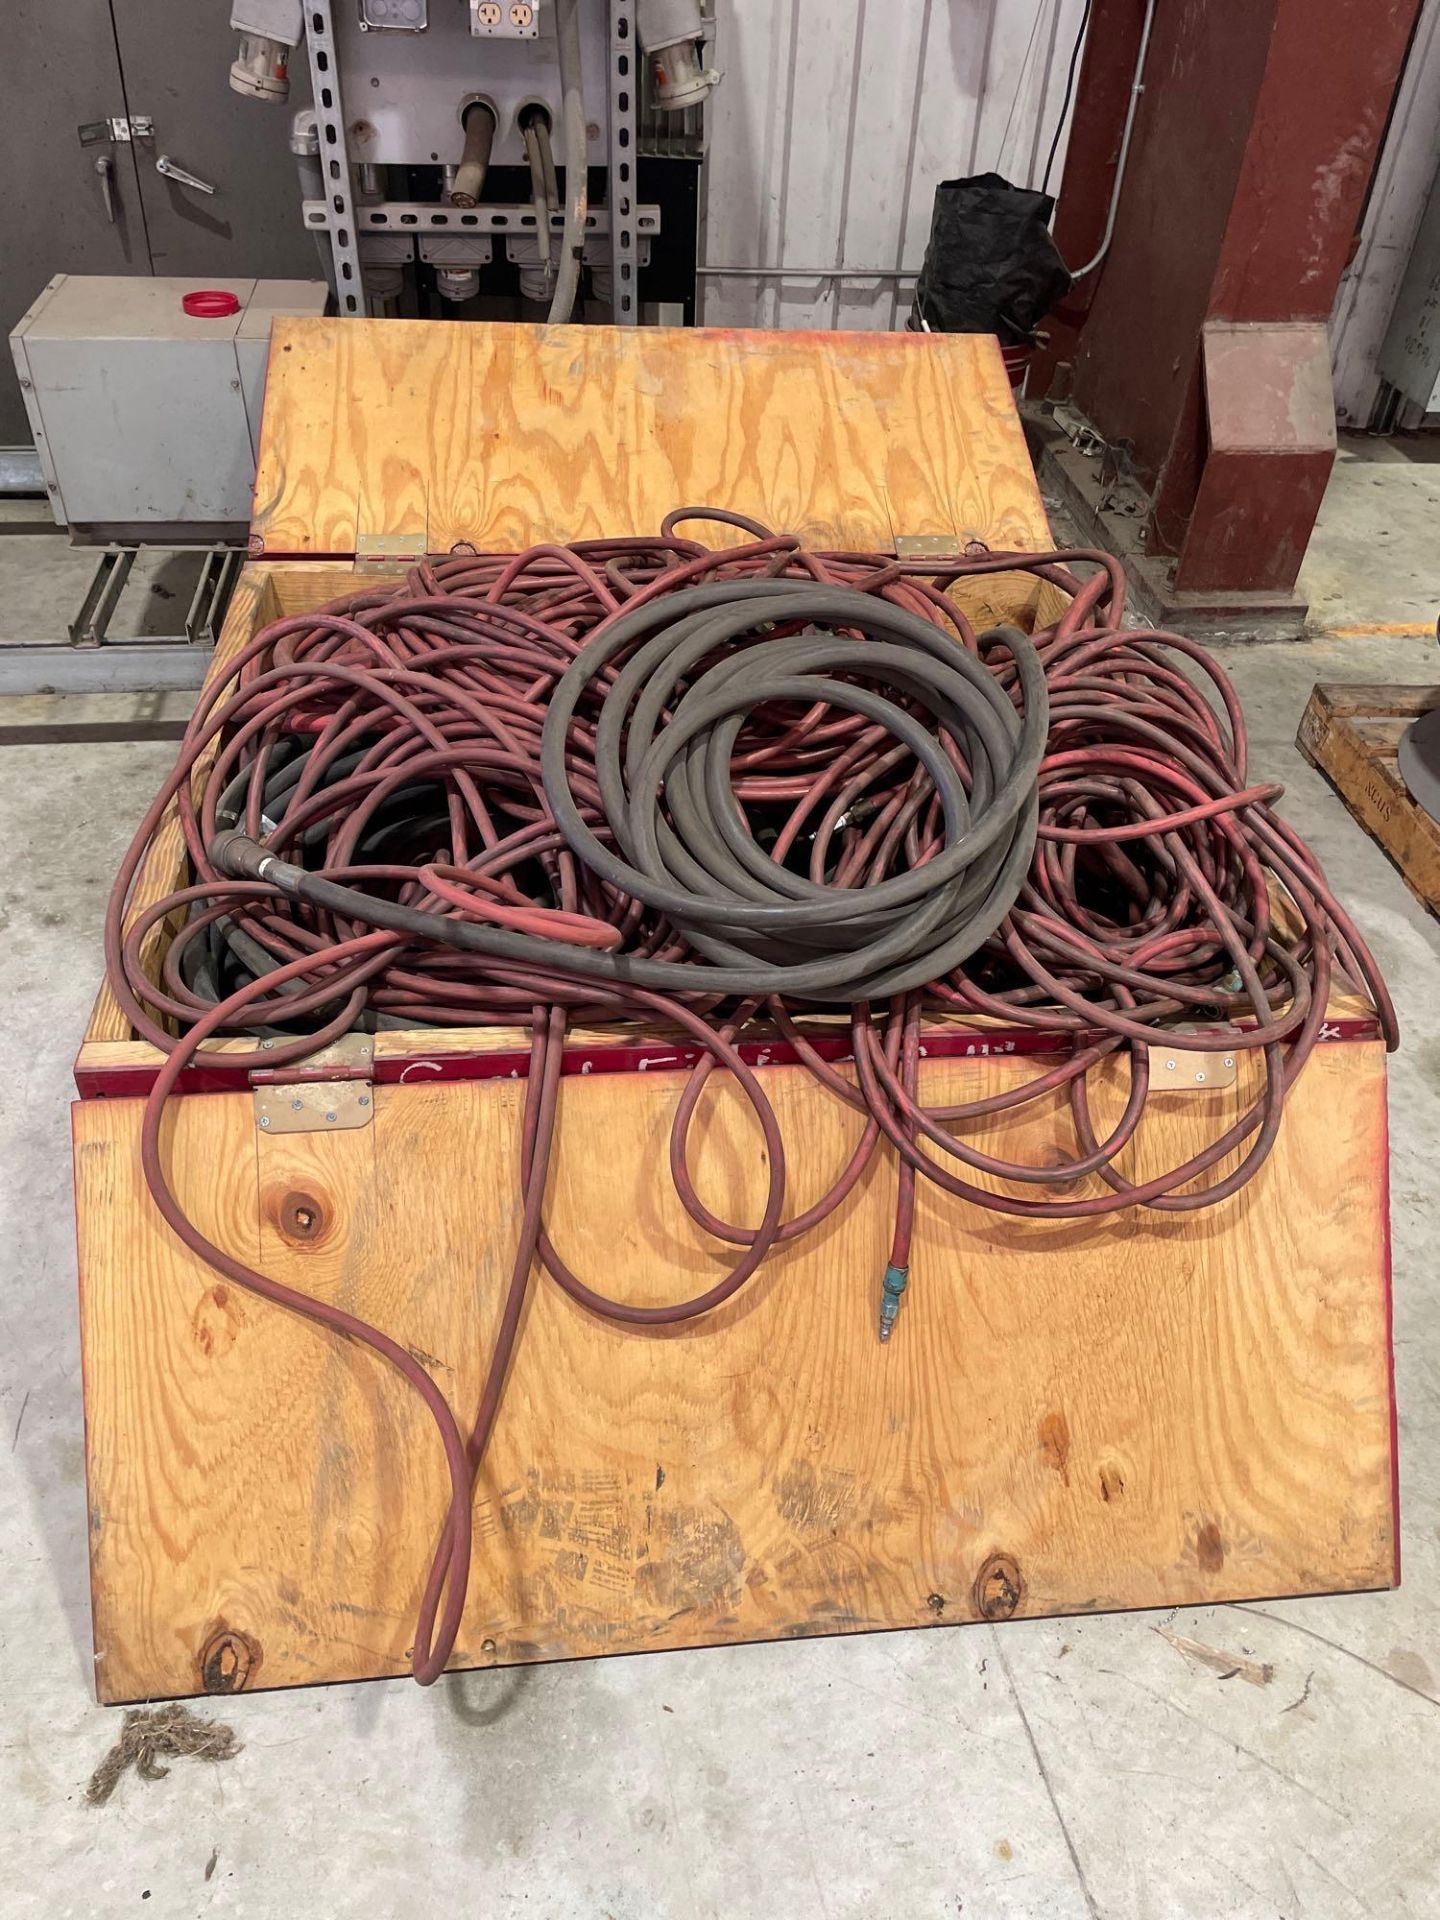 Crate of Hoses - Image 3 of 3